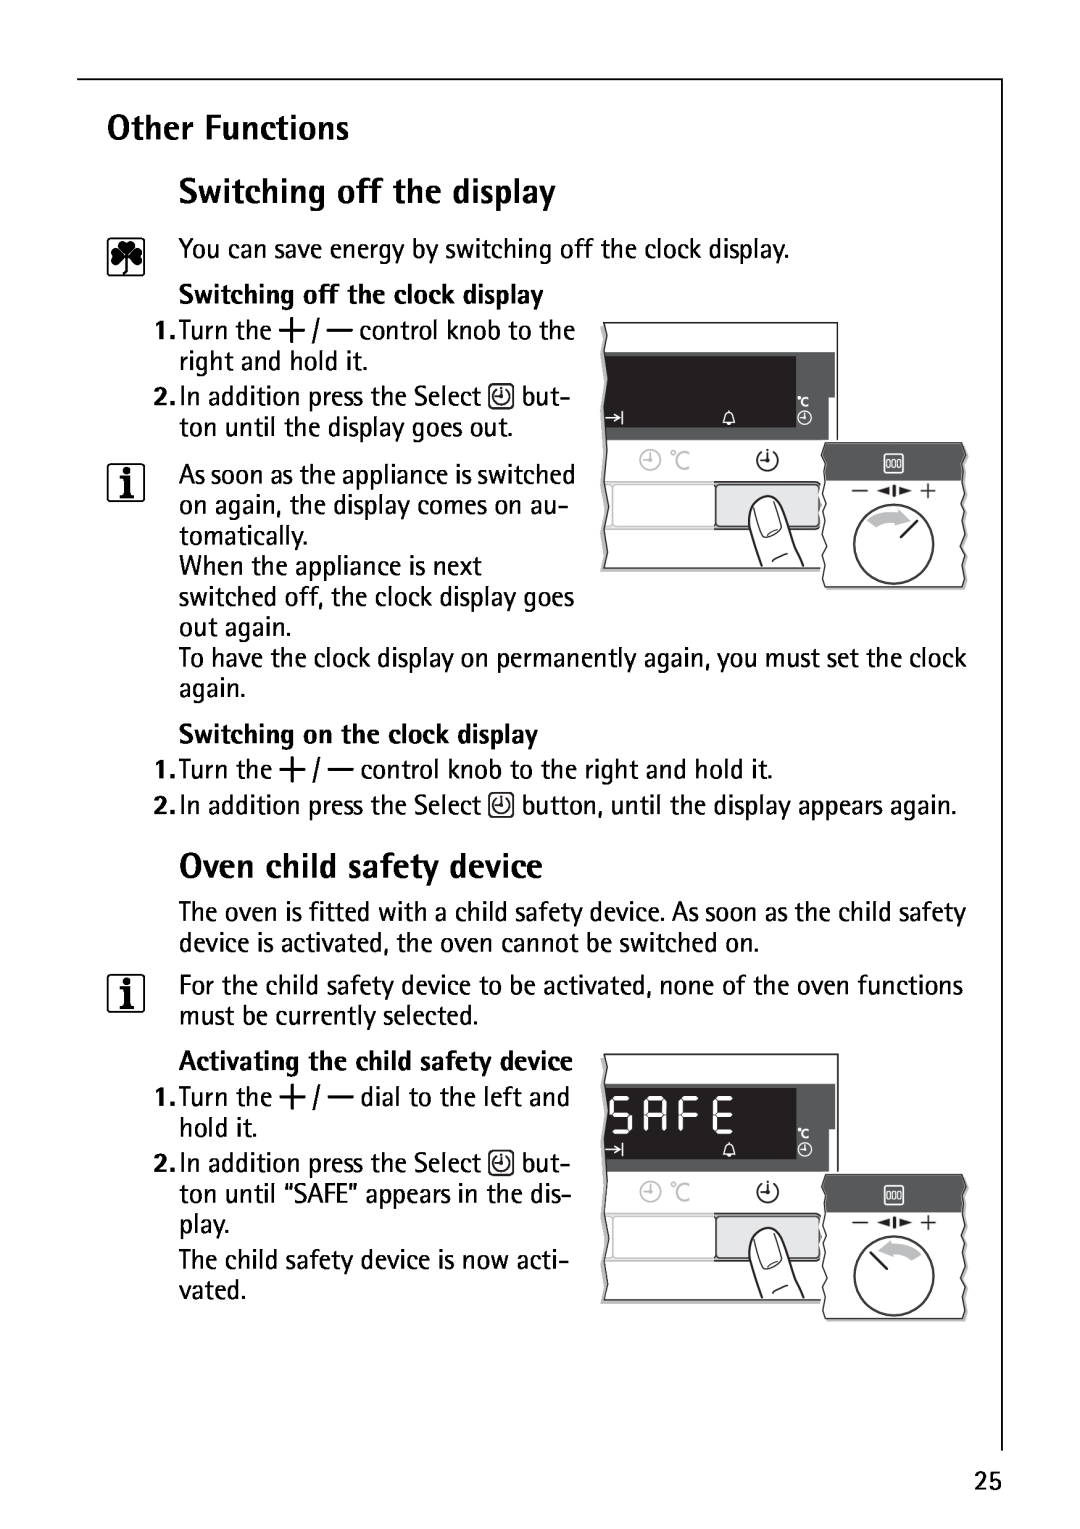 Electrolux B5741-4 Other Functions Switching off the display, Oven child safety device, Switching off the clock display 